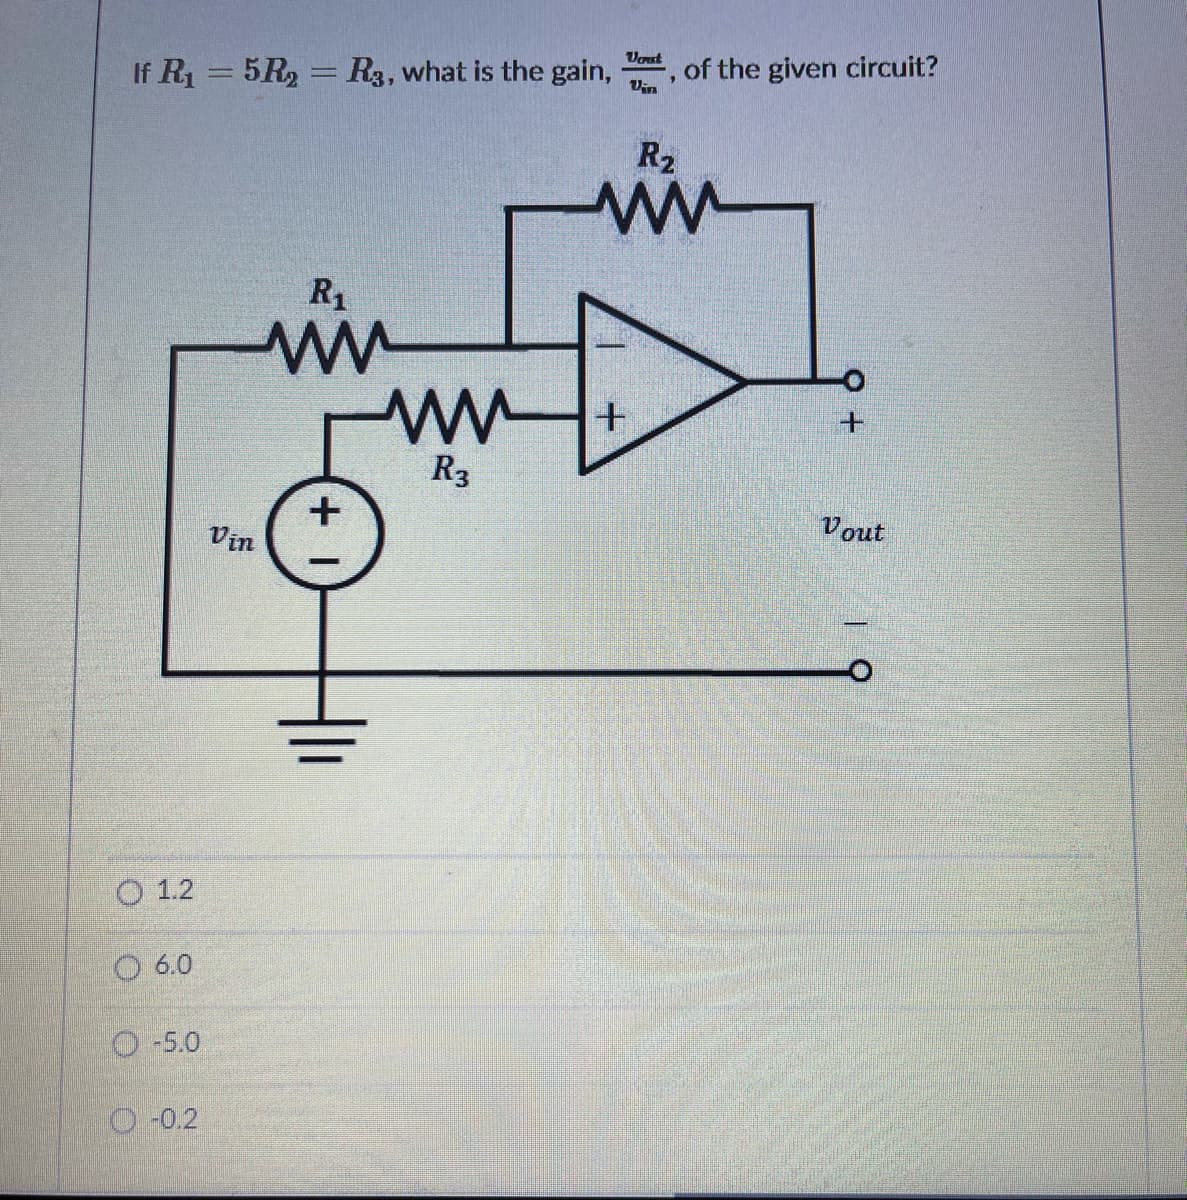 Vout
If R1 = 5R, = R3, what is the gain,
of the given circuit?
Vin
R2
ww-
R1
R3
Vin
Vout
O 1.2
O 6.0
O-5.0
O-0.2
